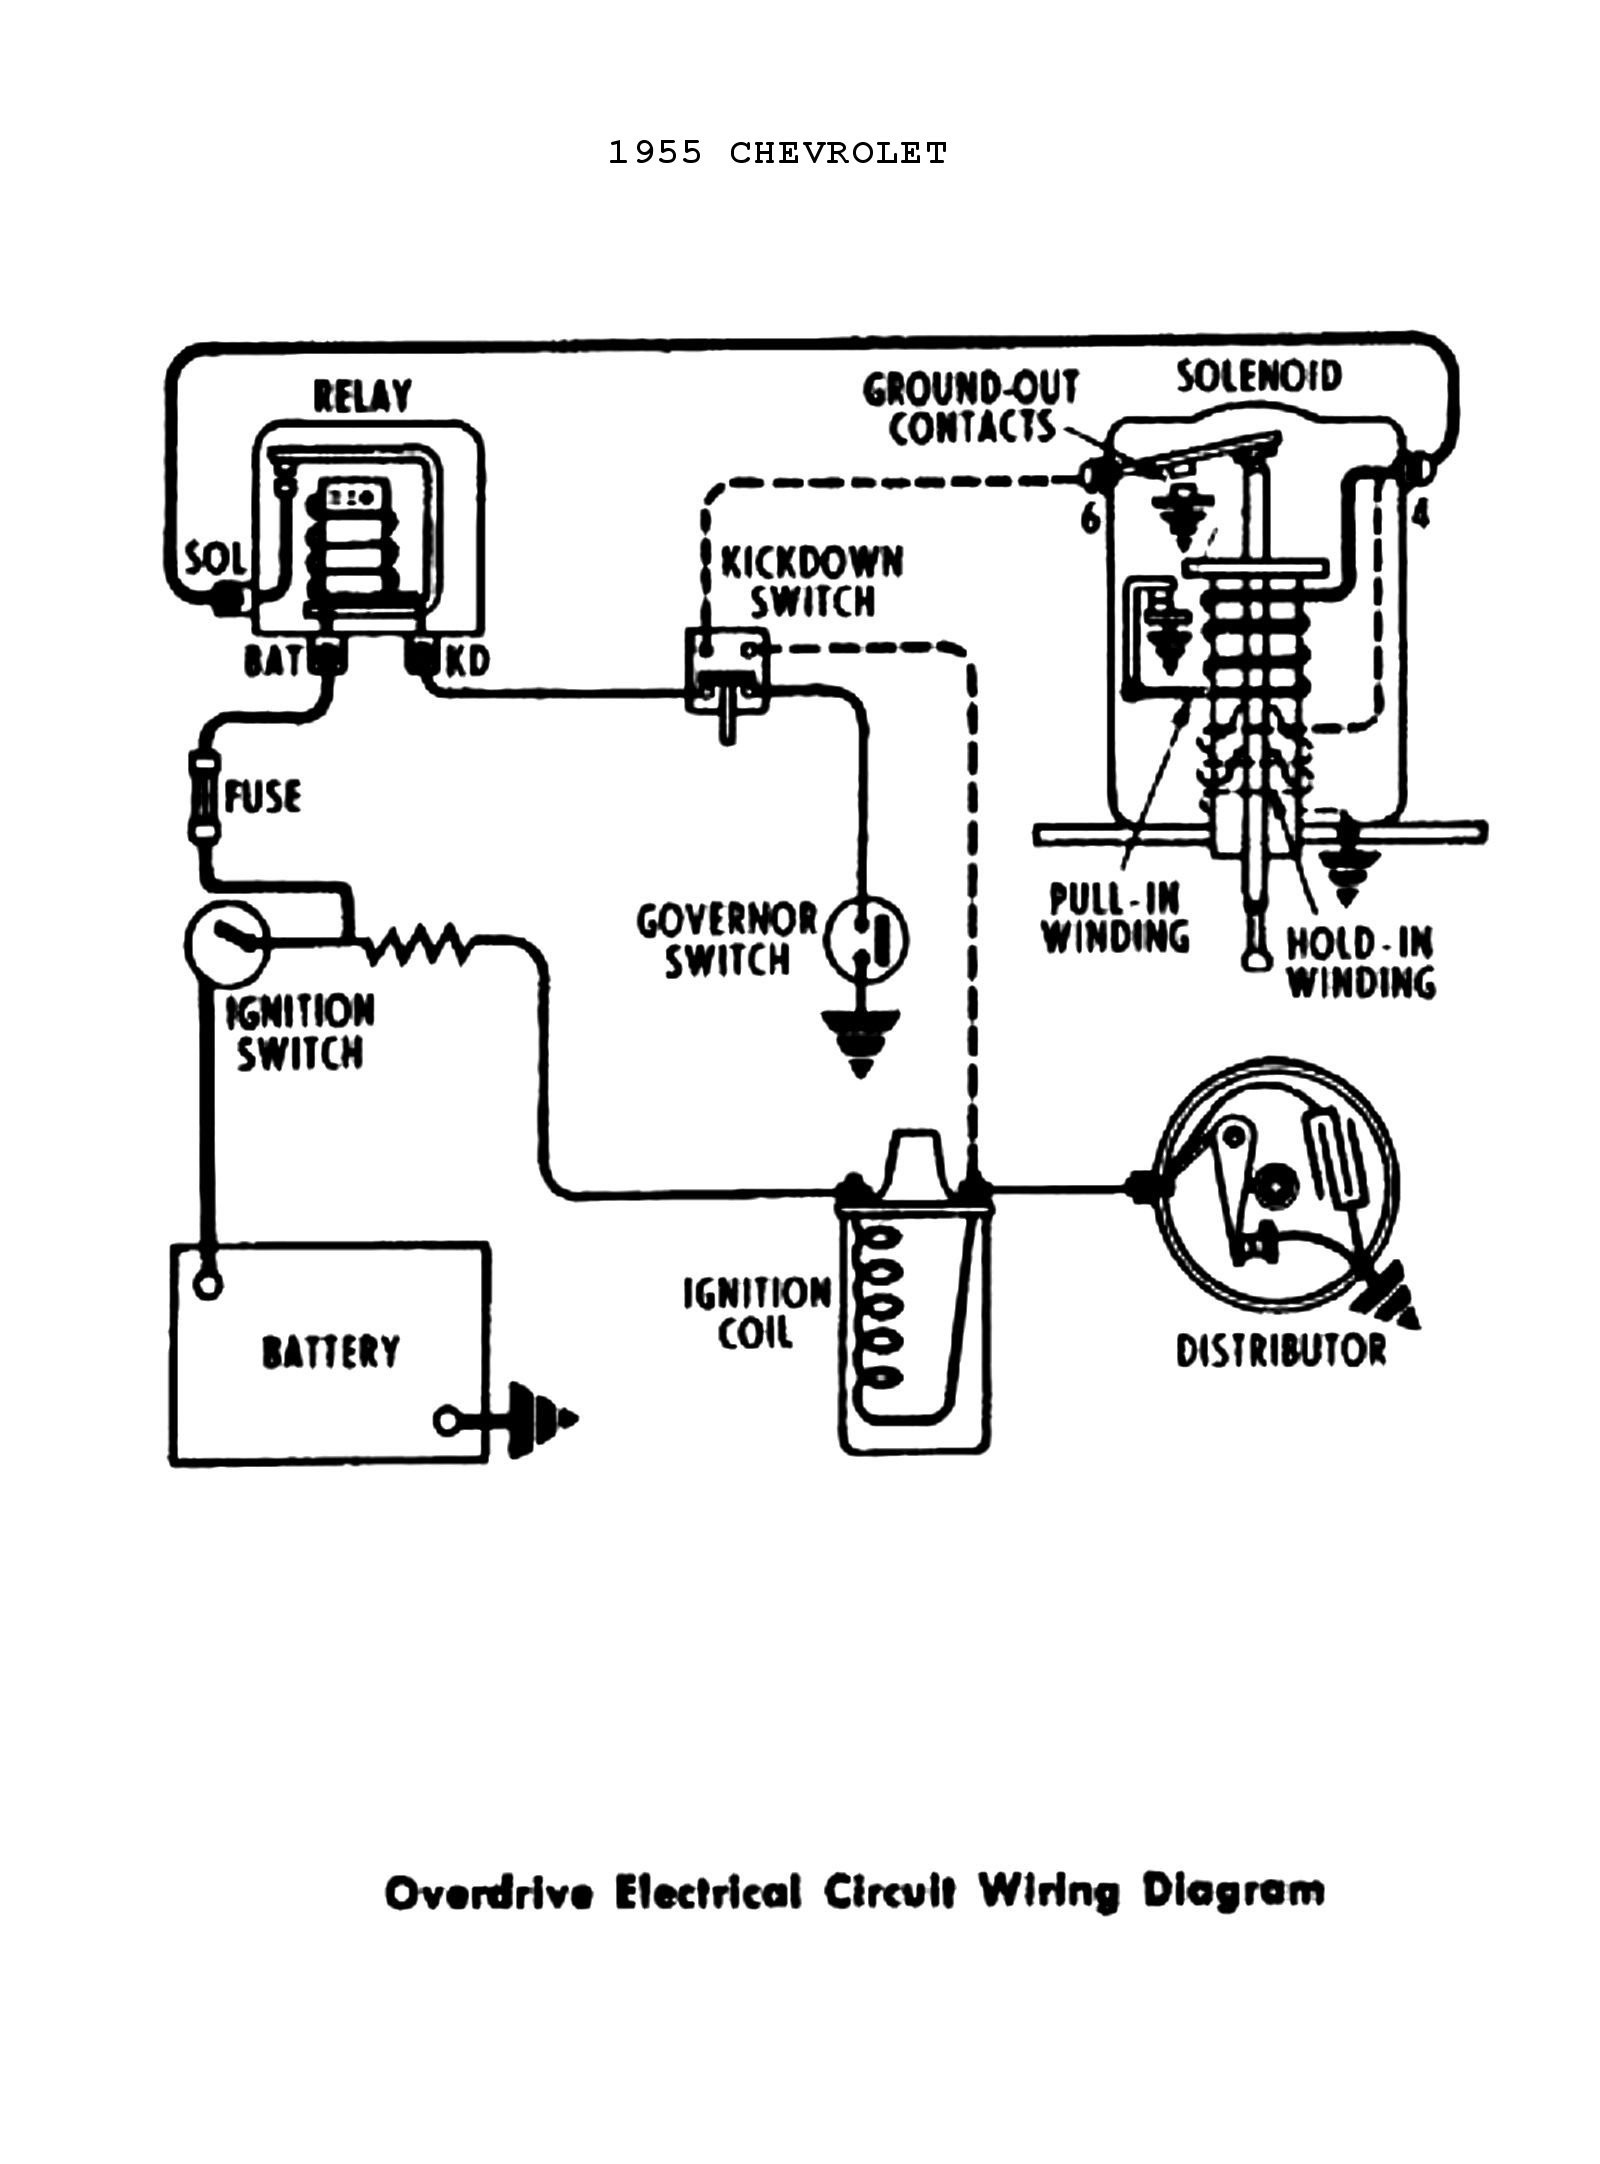 Basic Engine Wiring Diagram Chevy Truck Wiring Diagram Moreover 1955 Chevy Ignition Switch Of Basic Engine Wiring Diagram